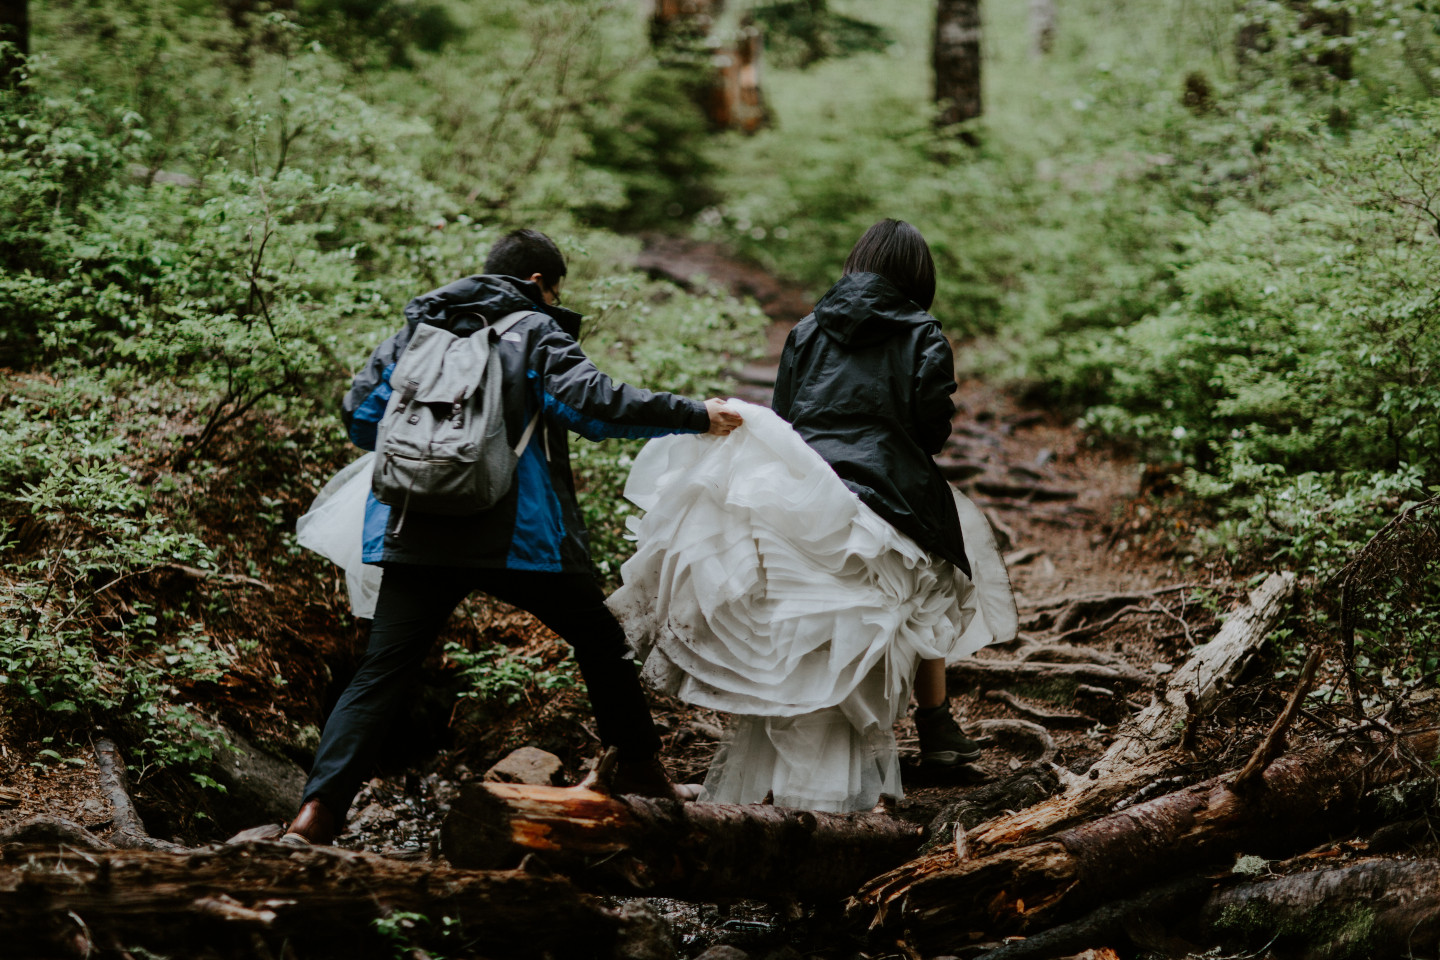 Alex and Valerie hike up the trail towards Mount Hood. Elopement wedding photography at Mount Hood by Sienna Plus Josh.